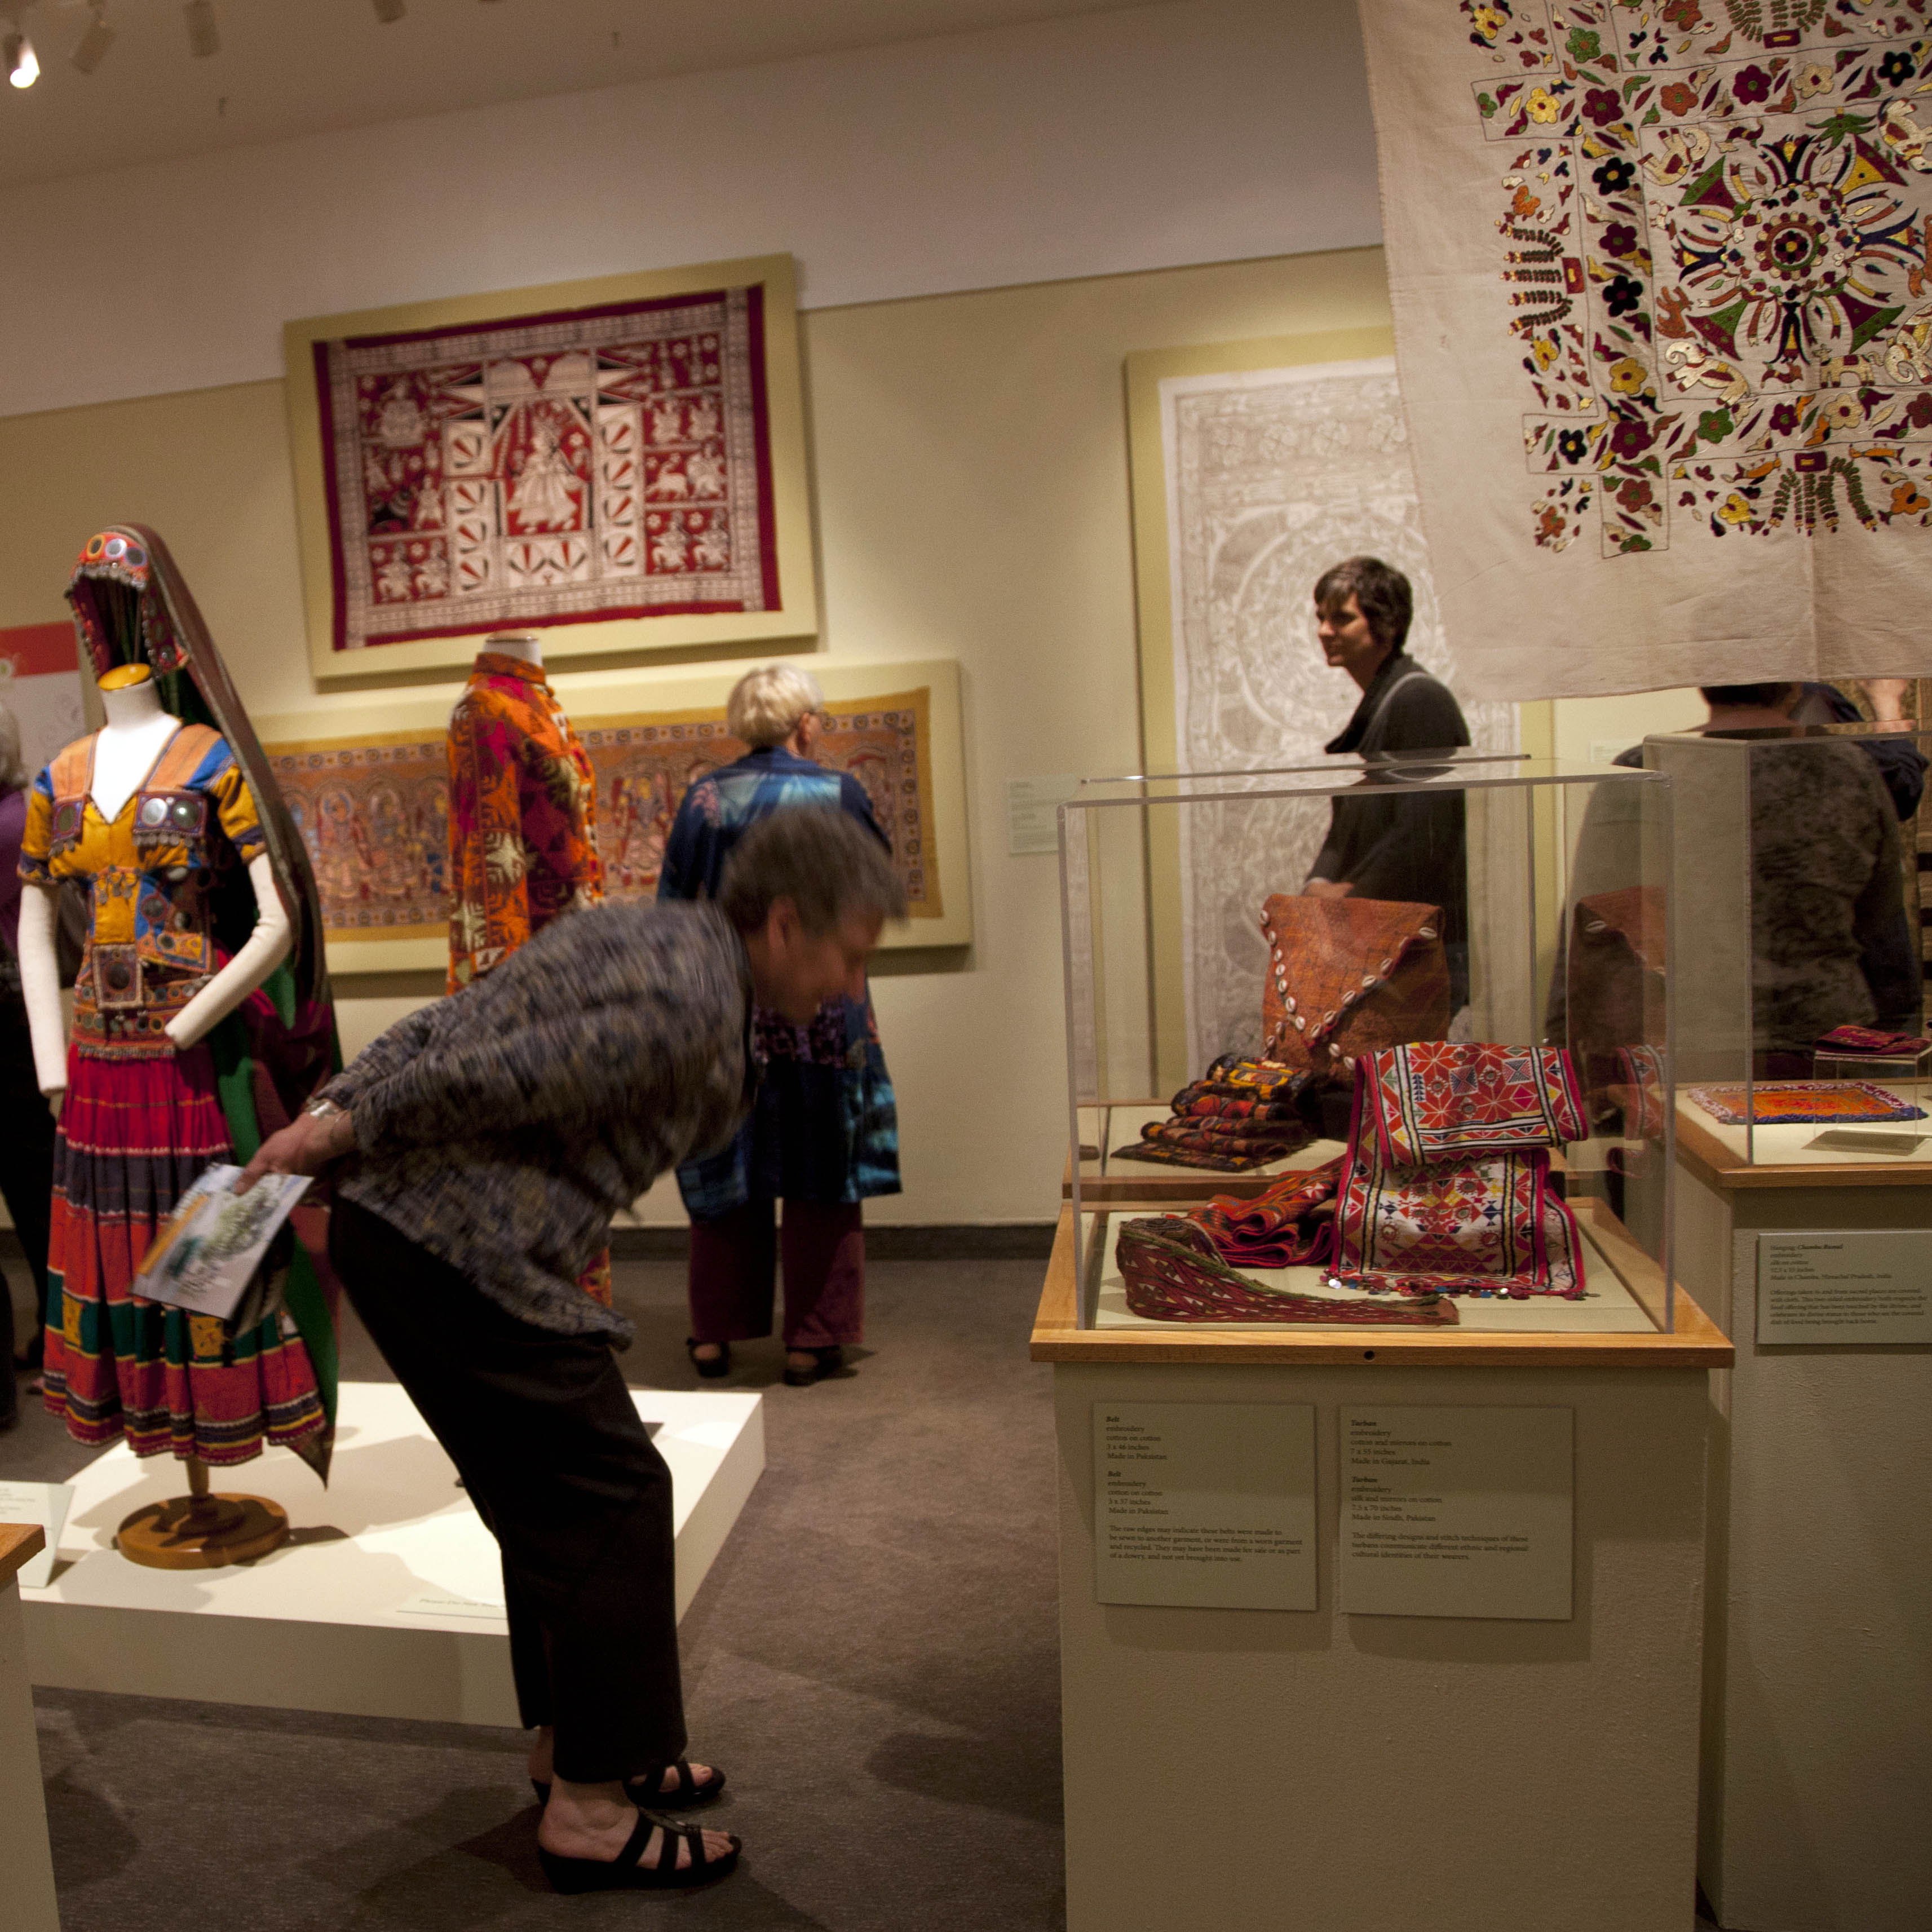 Beyond Peacocks and Paisleys: Handcrafted textiles of India and its neighbors exhibition opening with textiles on view and people milling about